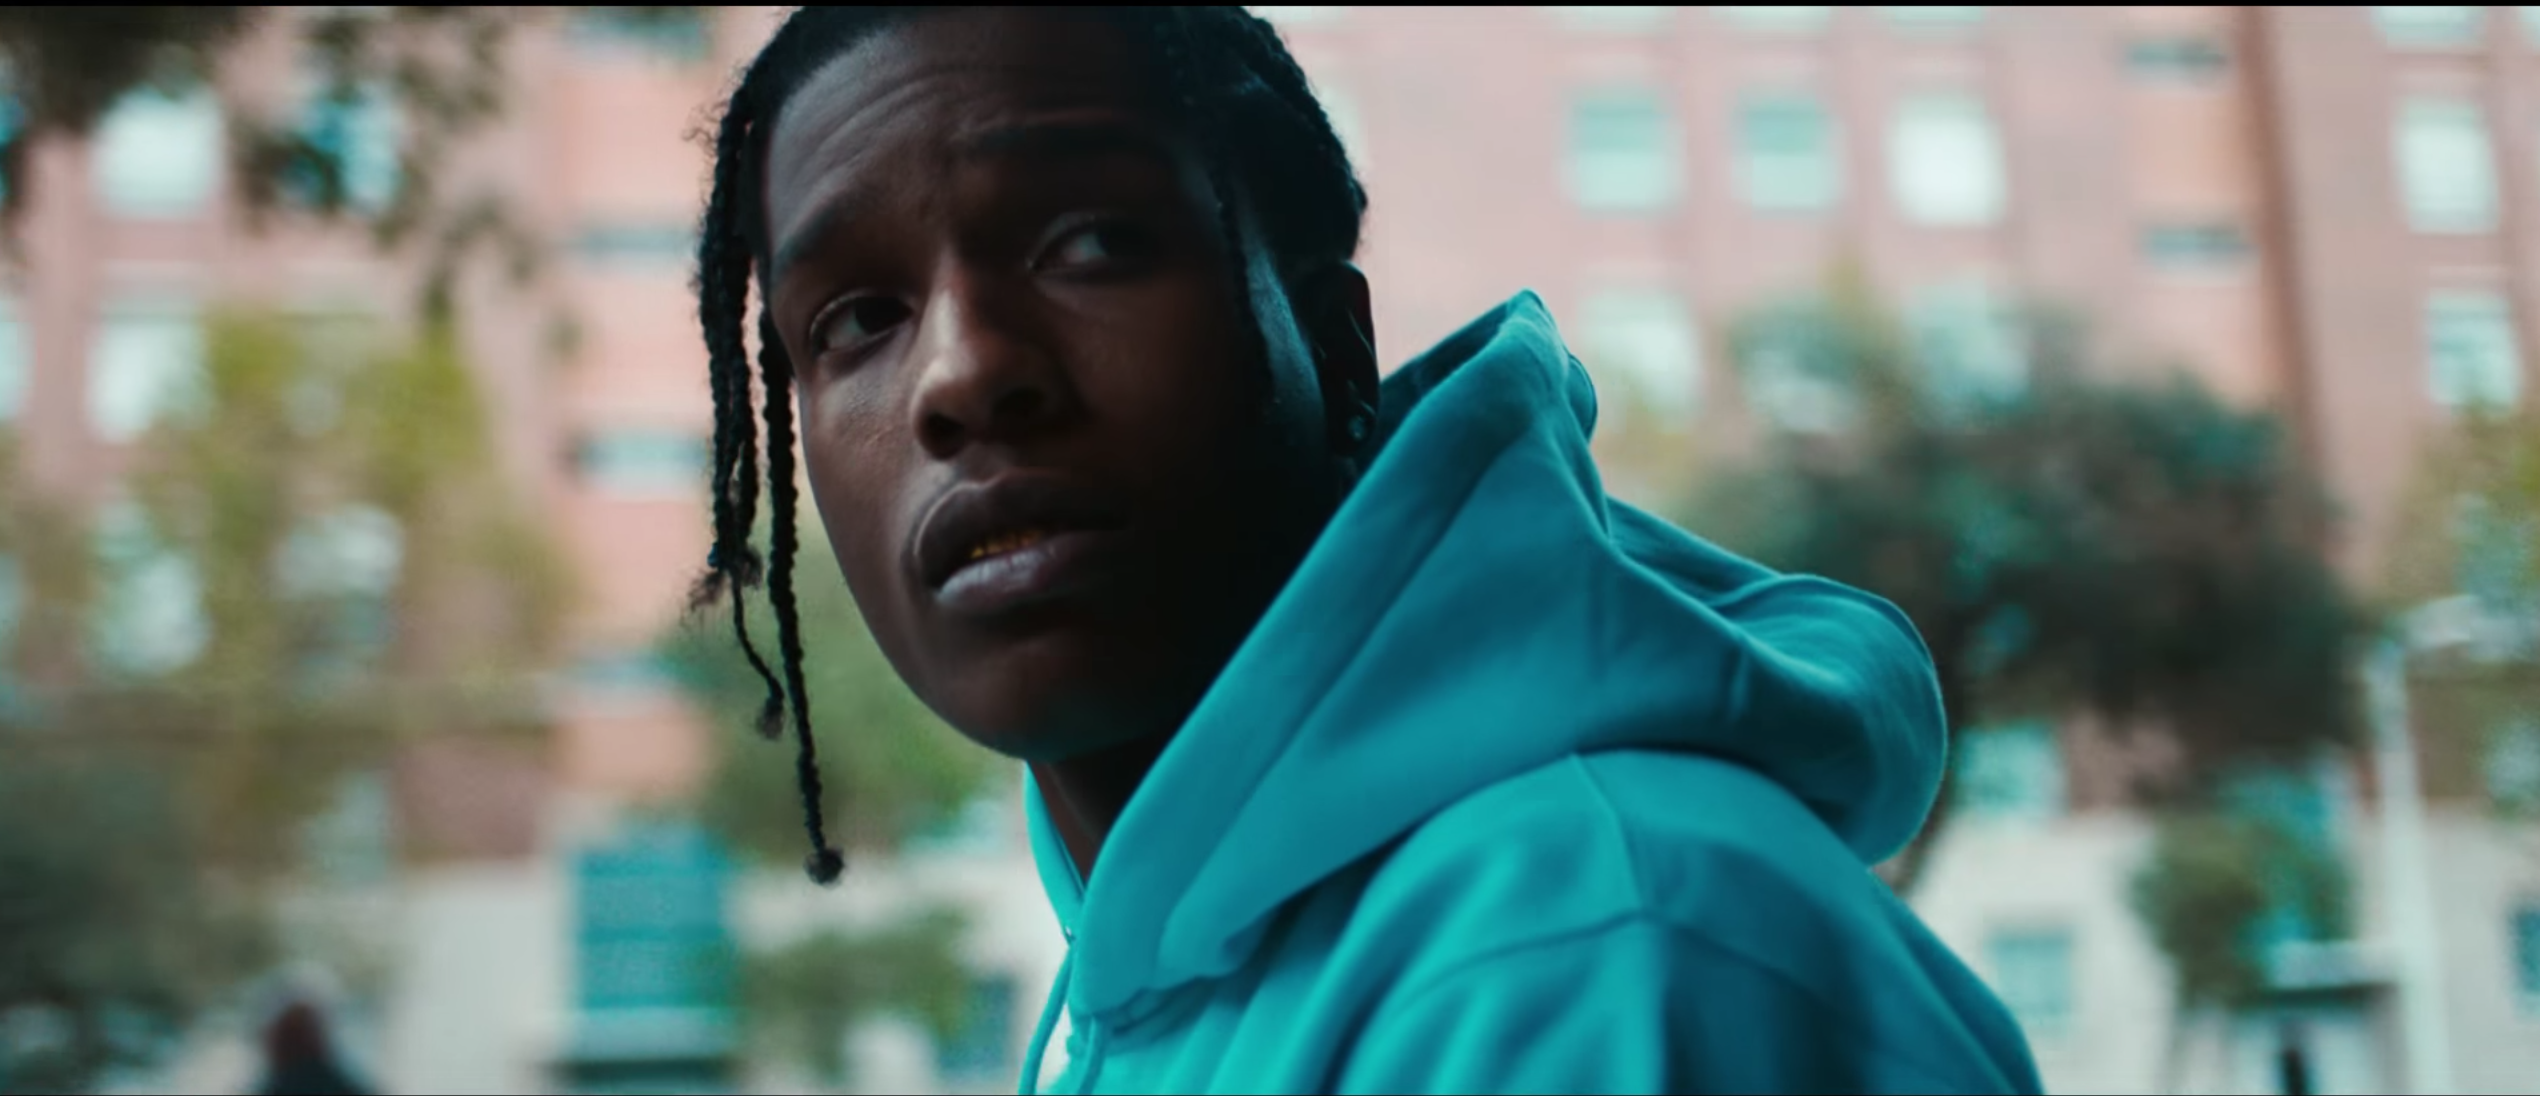 A$AP Rocky Opens Up About His Brothers Death In New Mercedes-Benz Advert